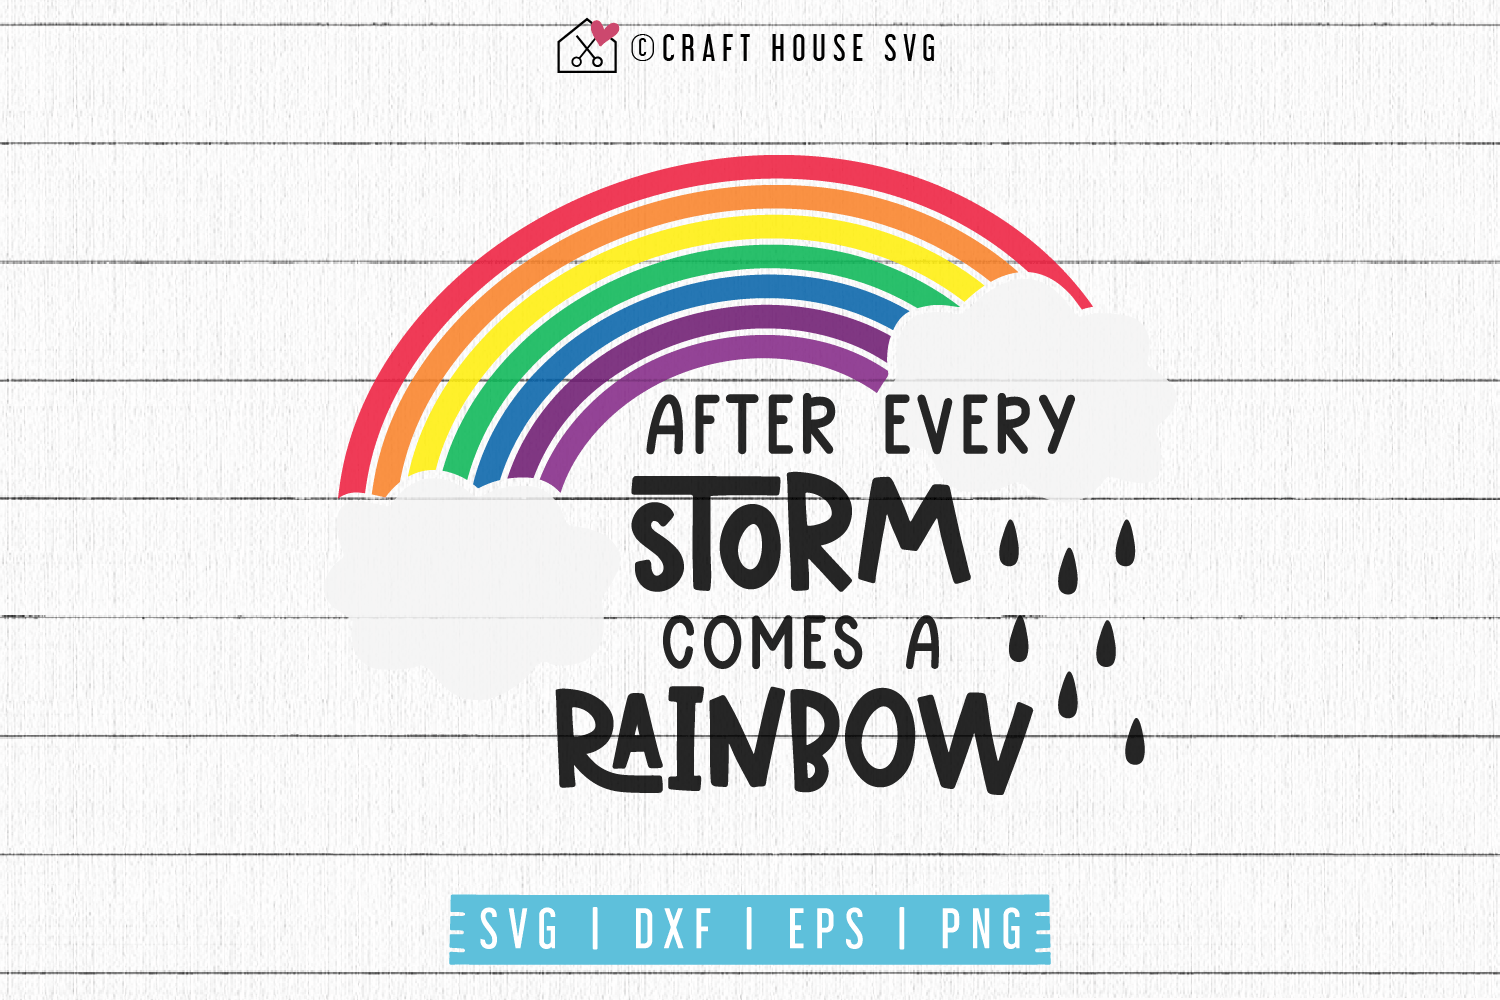 After every storm comes a rainbow SVG | M53F Craft House SVG - SVG files for Cricut and Silhouette